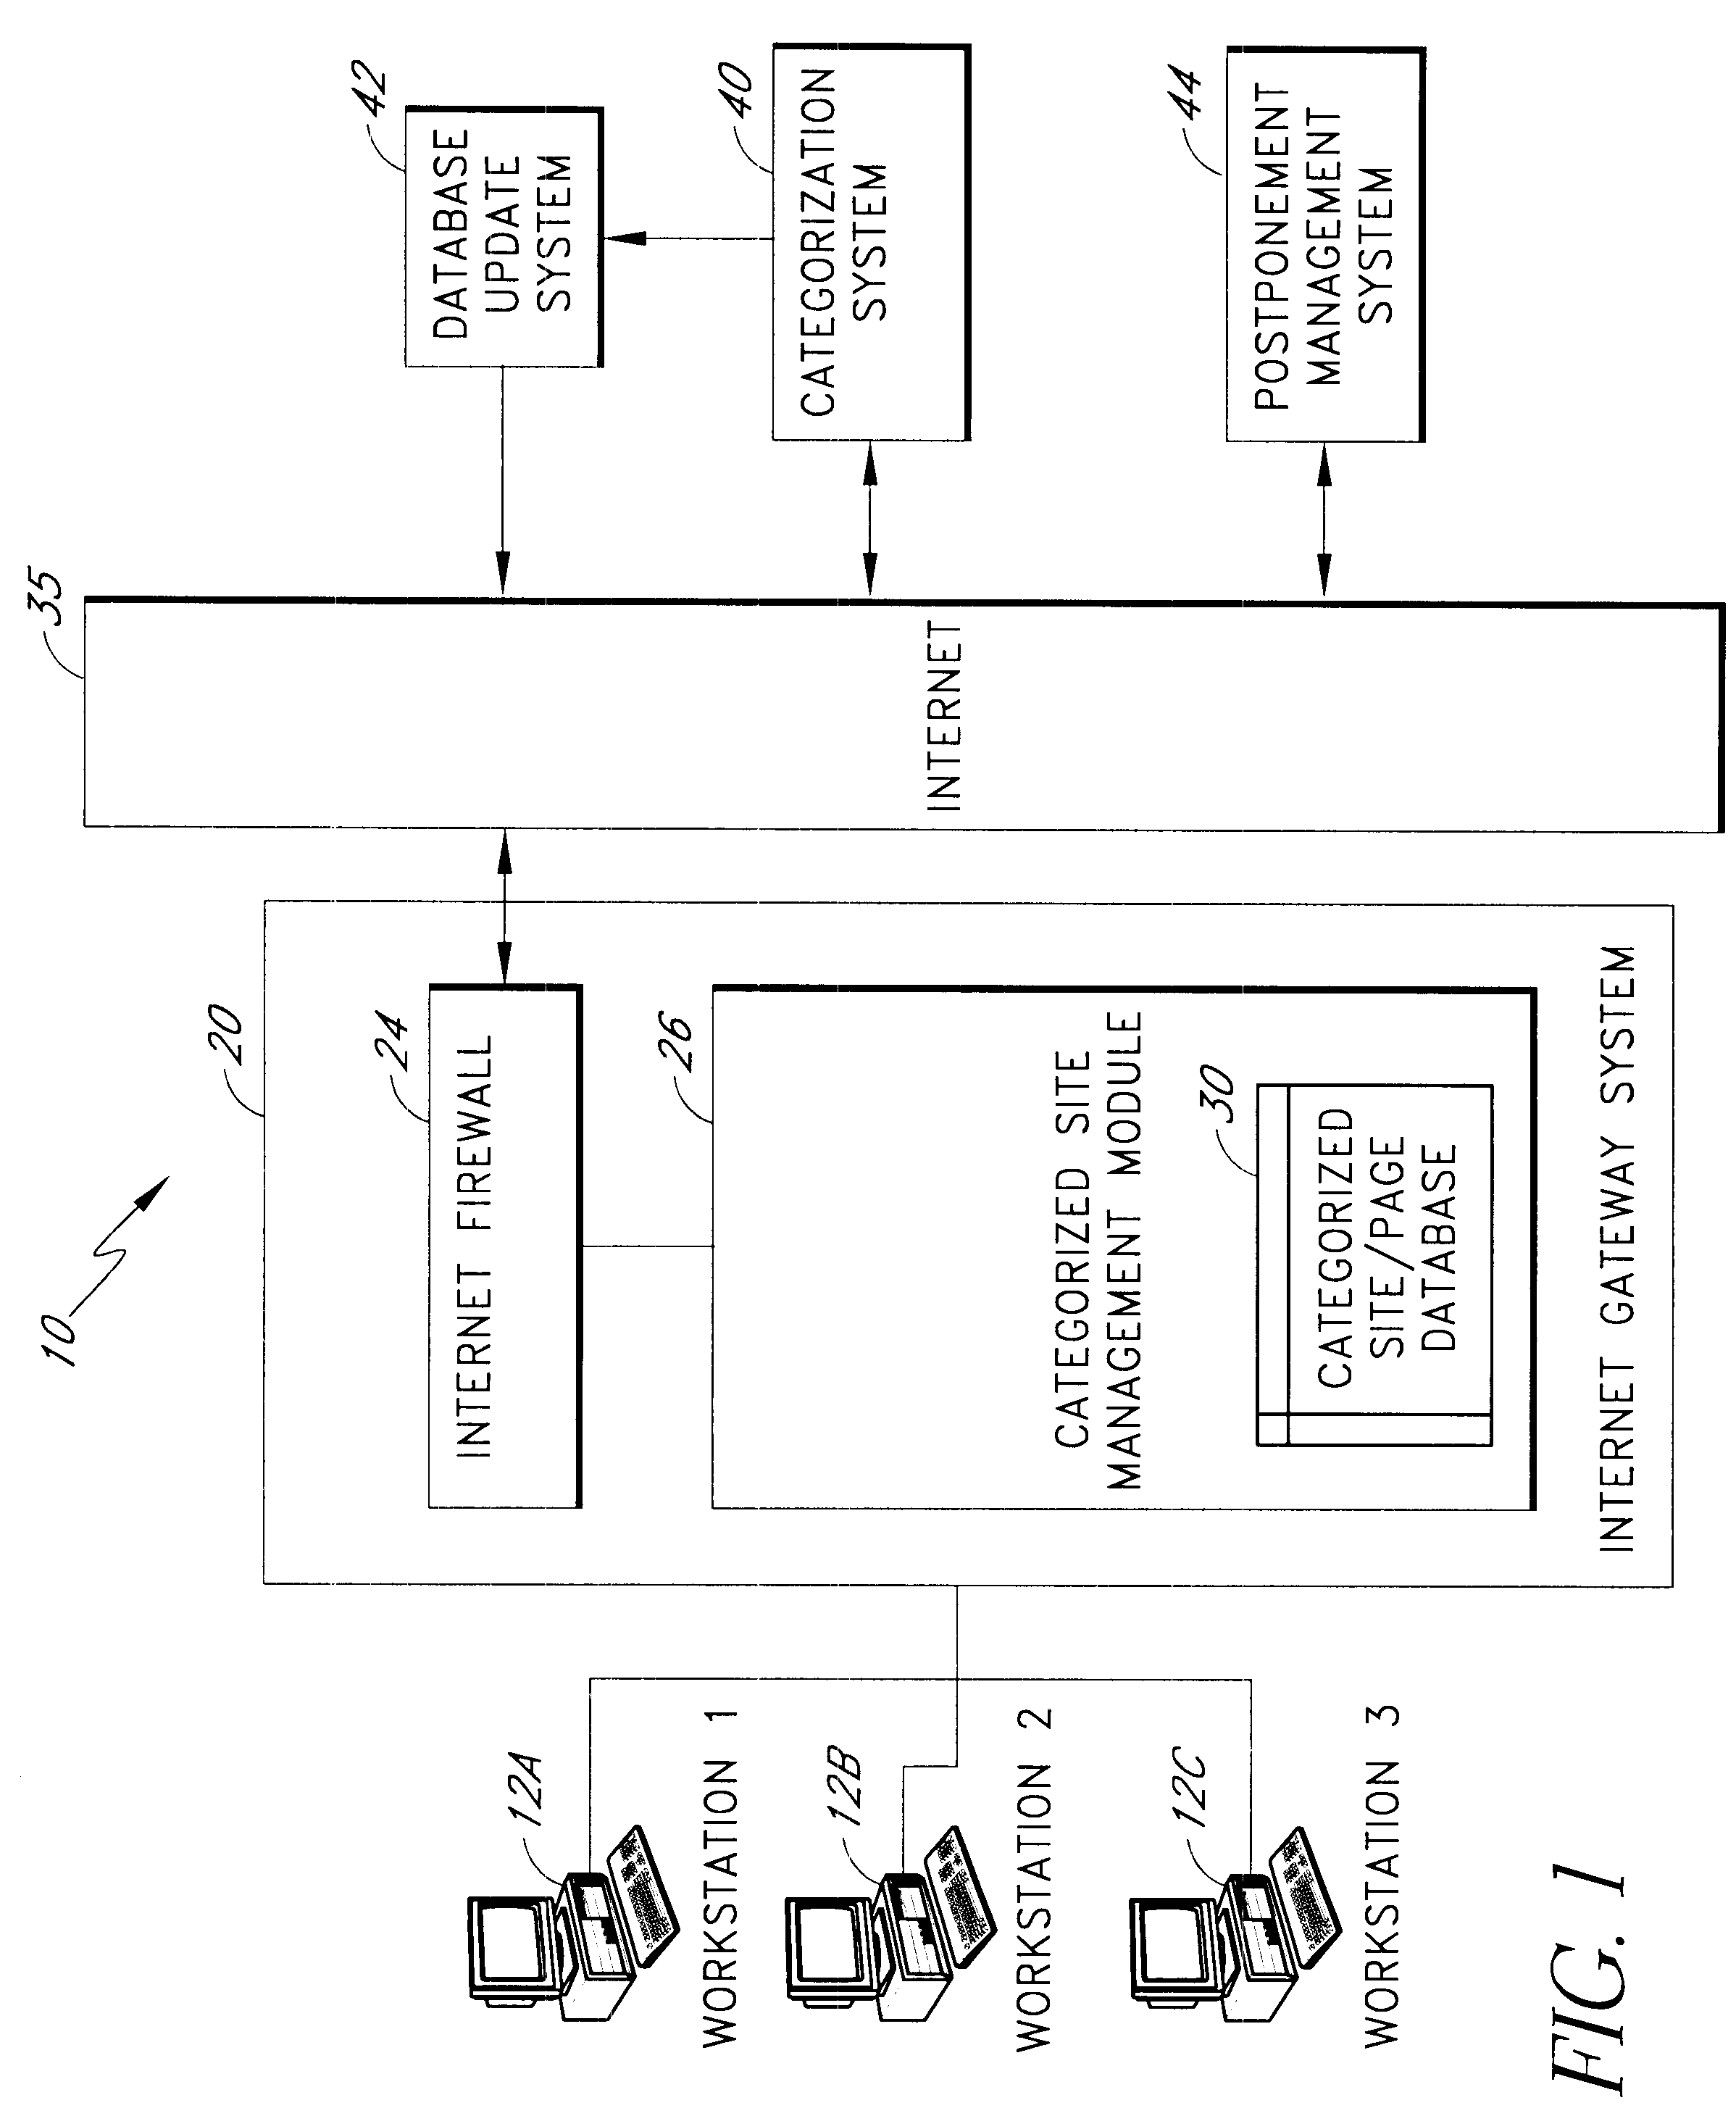 System and method for controlling access to internet sites